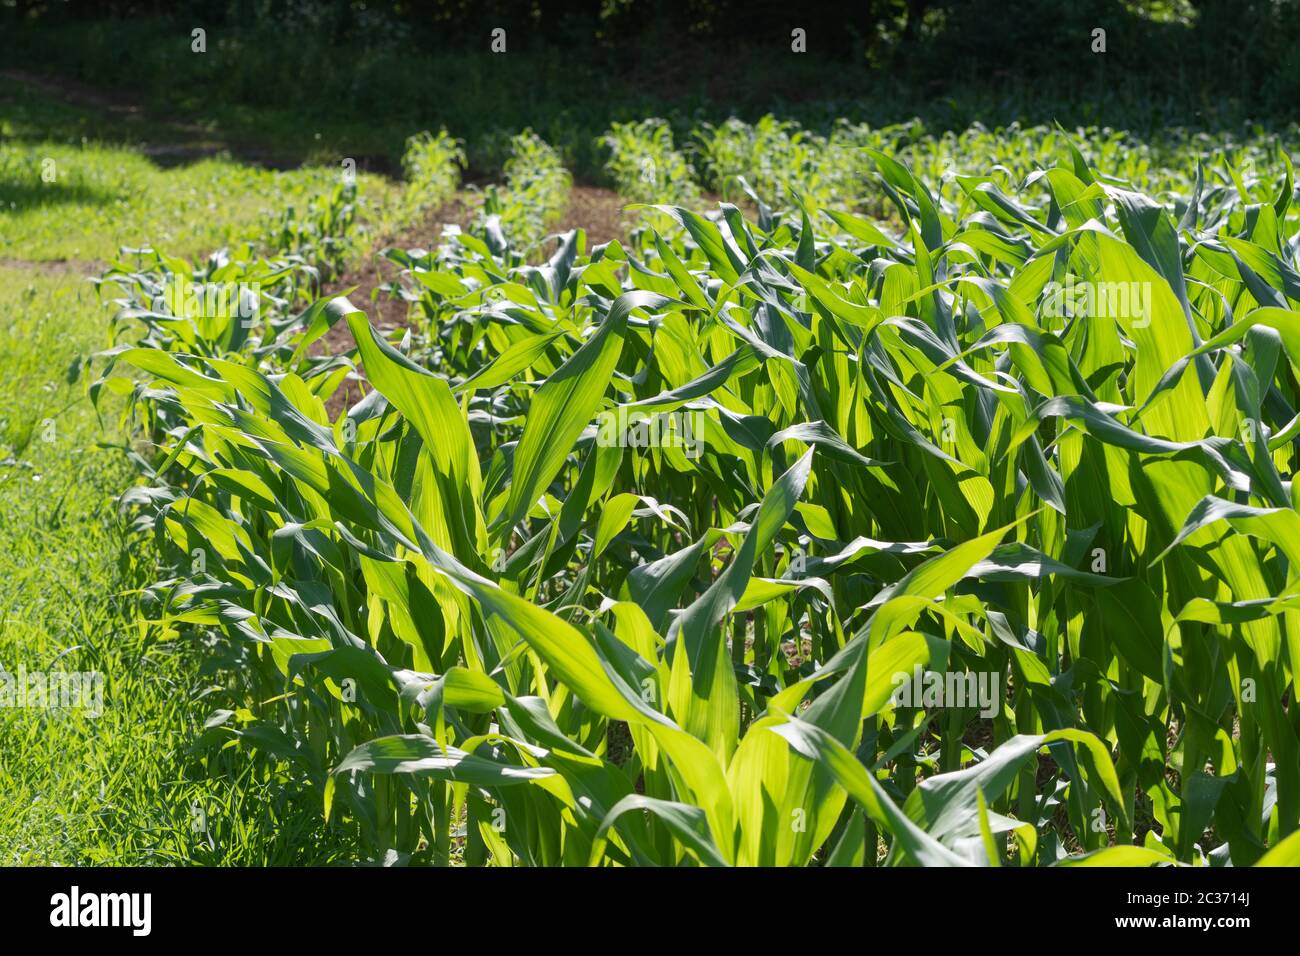 Closeup of young green corn plants growing in corn field. Agriculture, farming, GMO and food concepts. Stock Photo